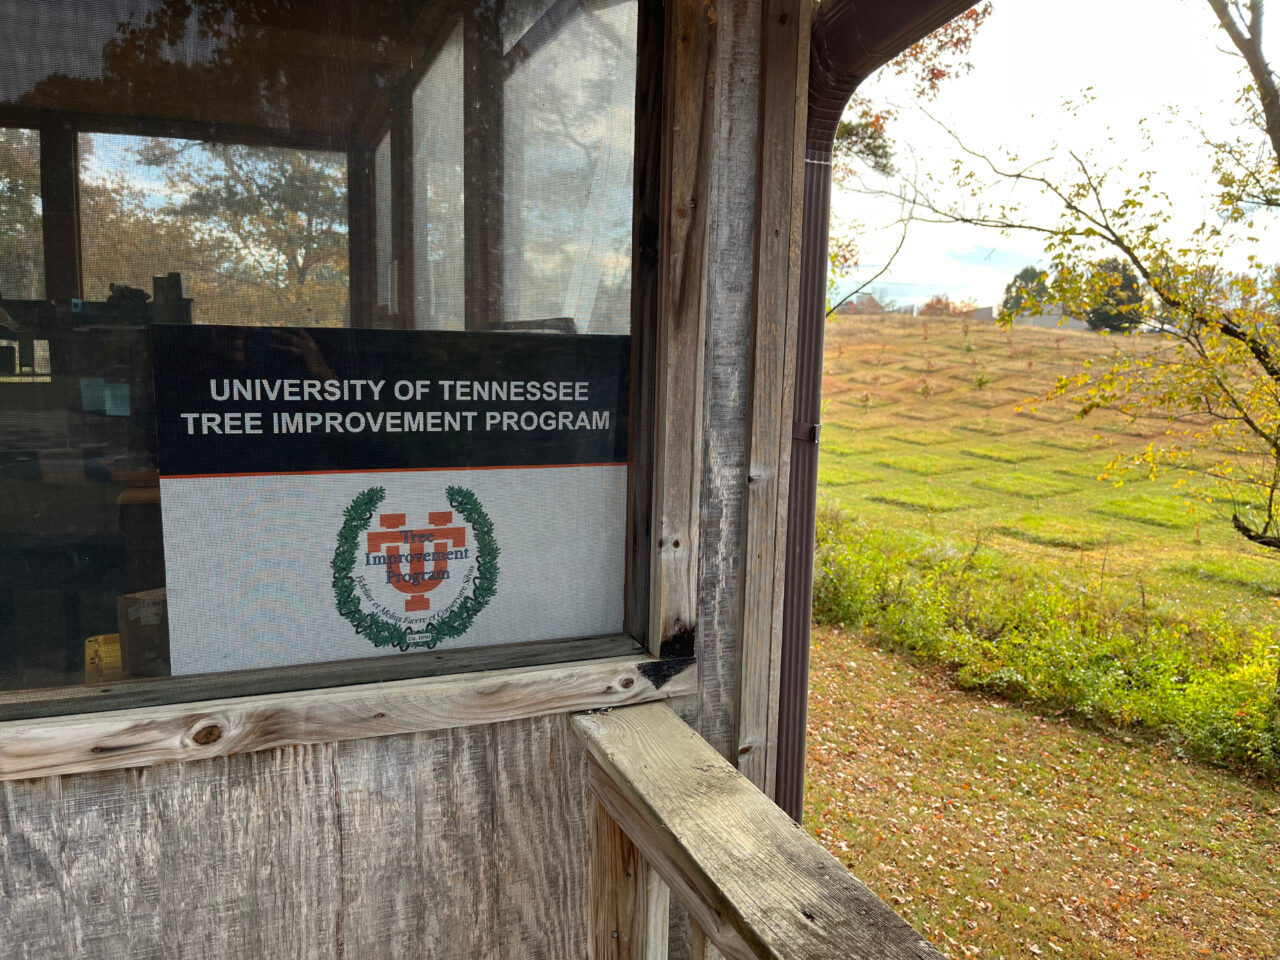 The UT Tree Improvement Program began 65 years ago with a simple mission: to faithfully improve and protect the forest, a translation of the Latin in its seal. Mitzy Sosa / American Forests